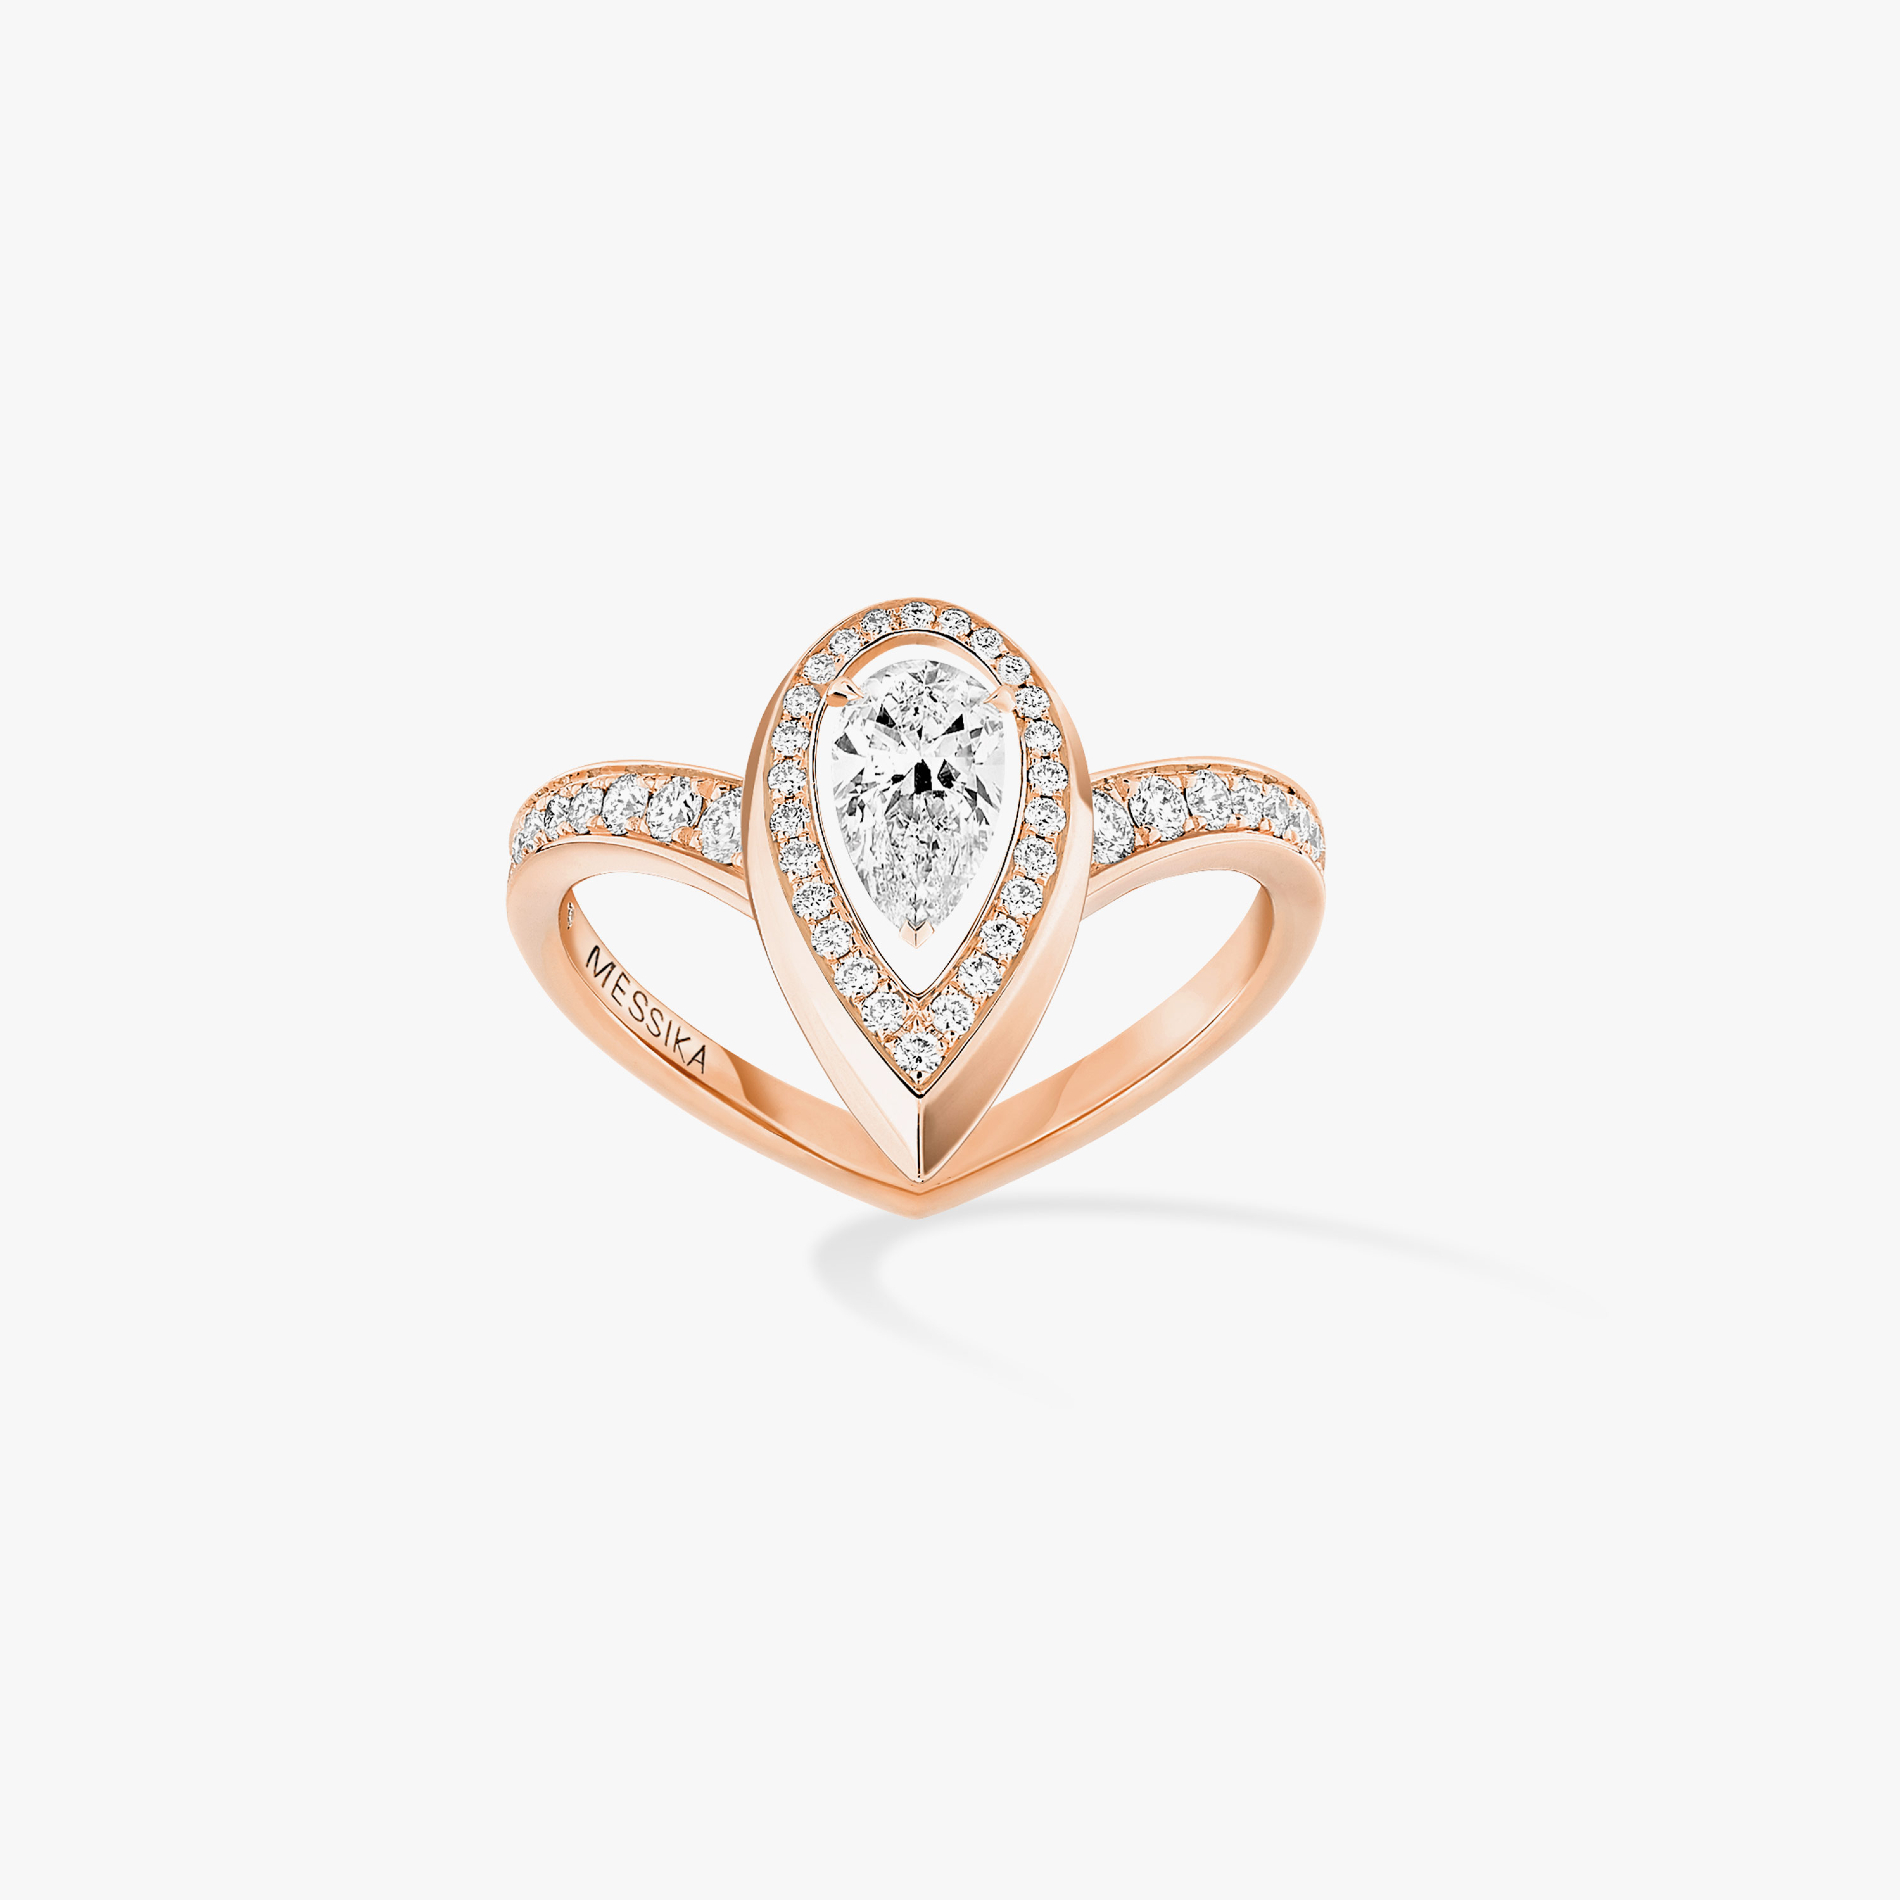 Ring For Her Pink Gold Diamond Fiery 0.30ct 12331-PG